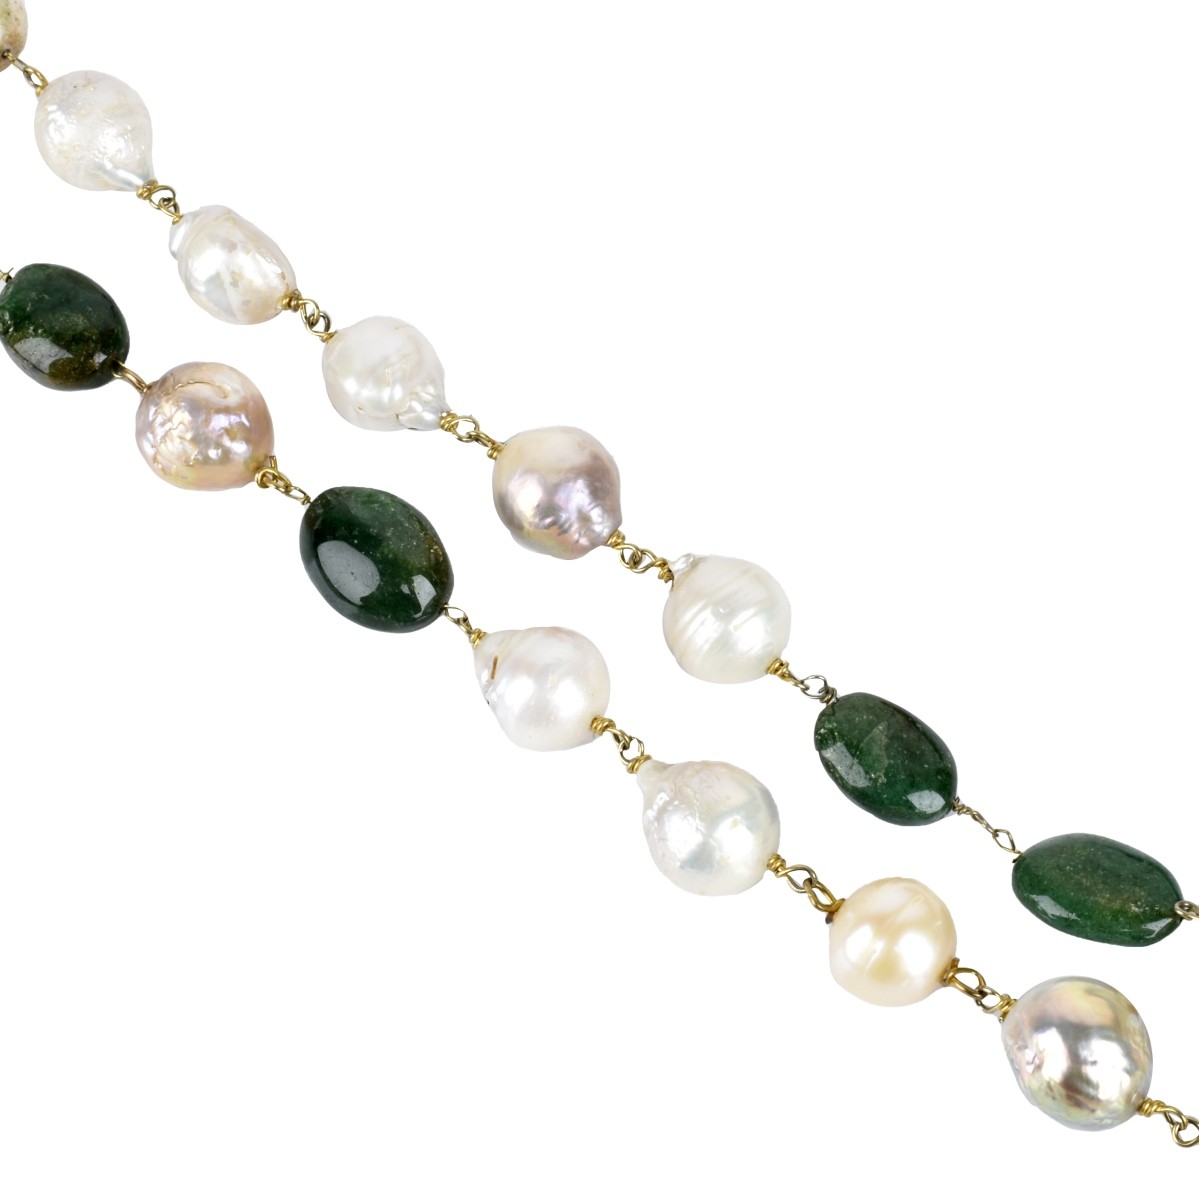 Baroque Pearl and Emerald Necklace